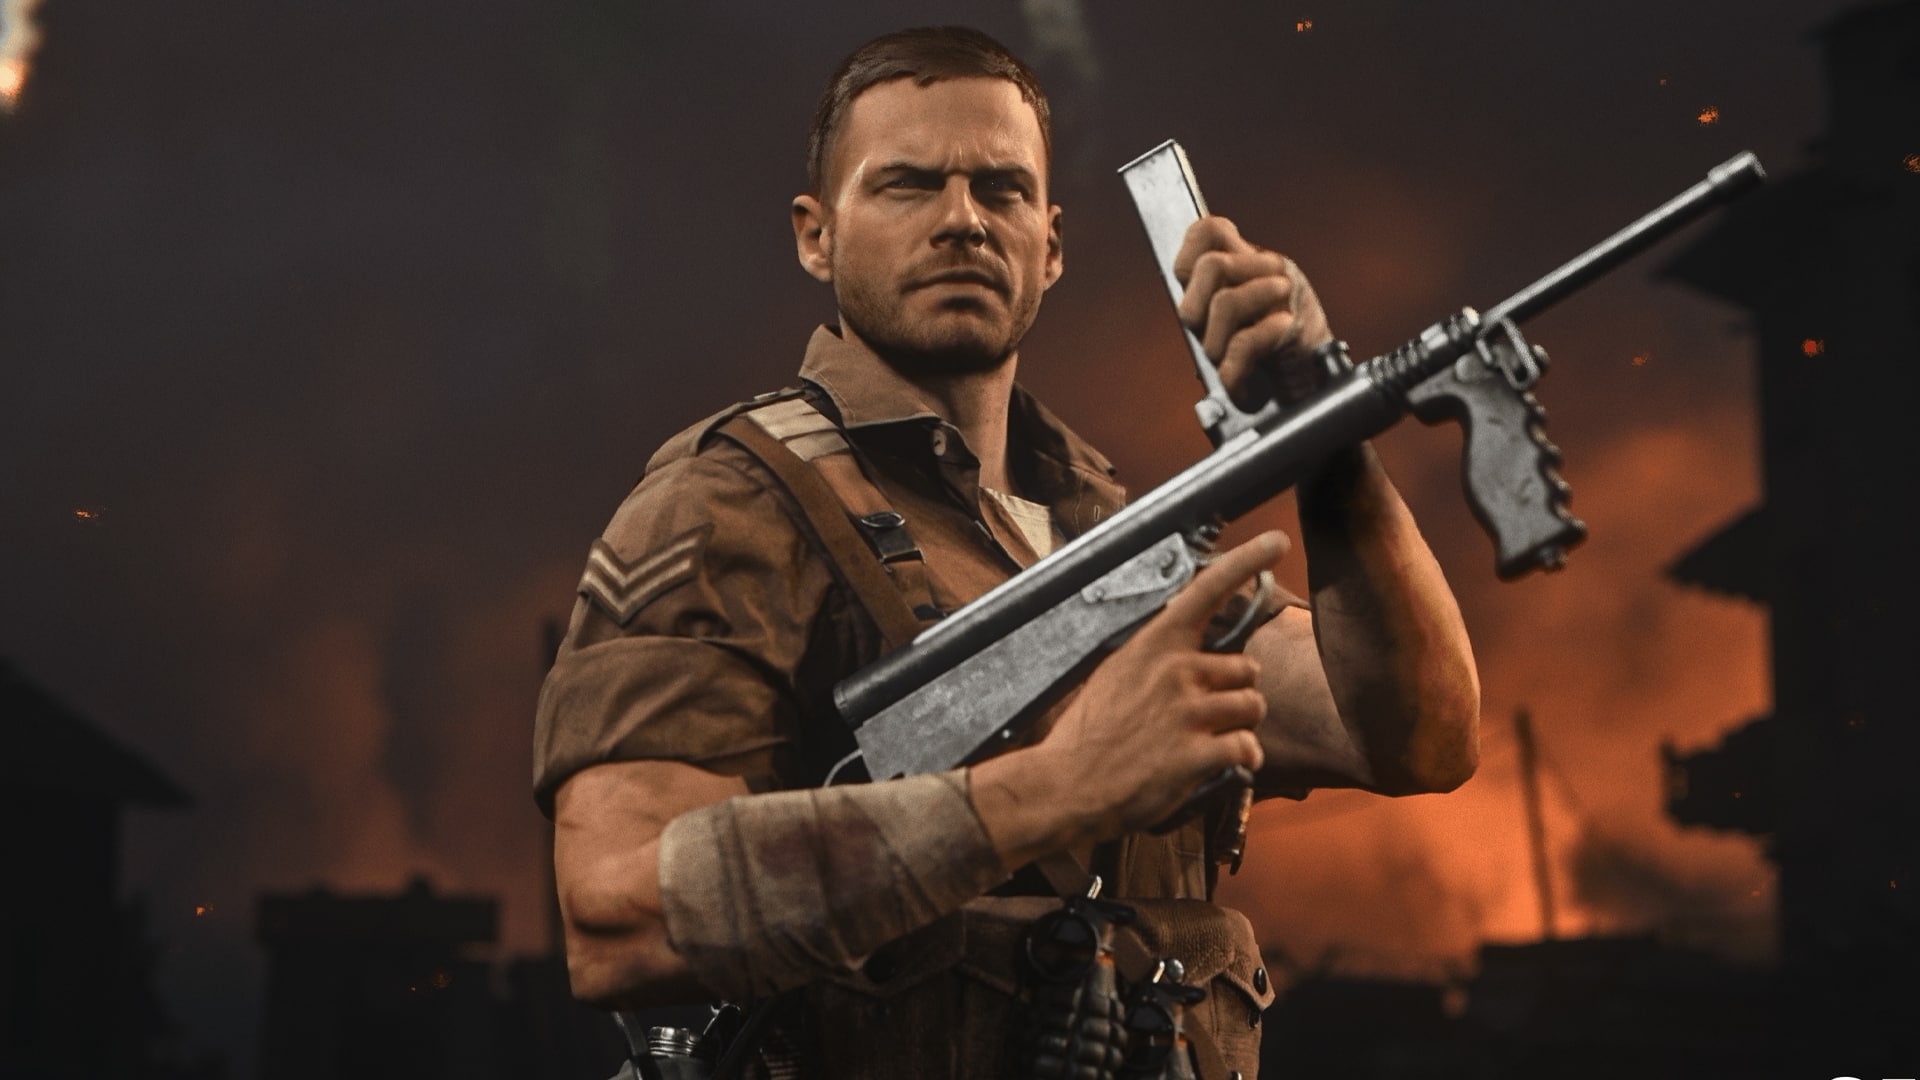 Activision says own execution caused 'Call Of Duty: Vanguard'  disappointment